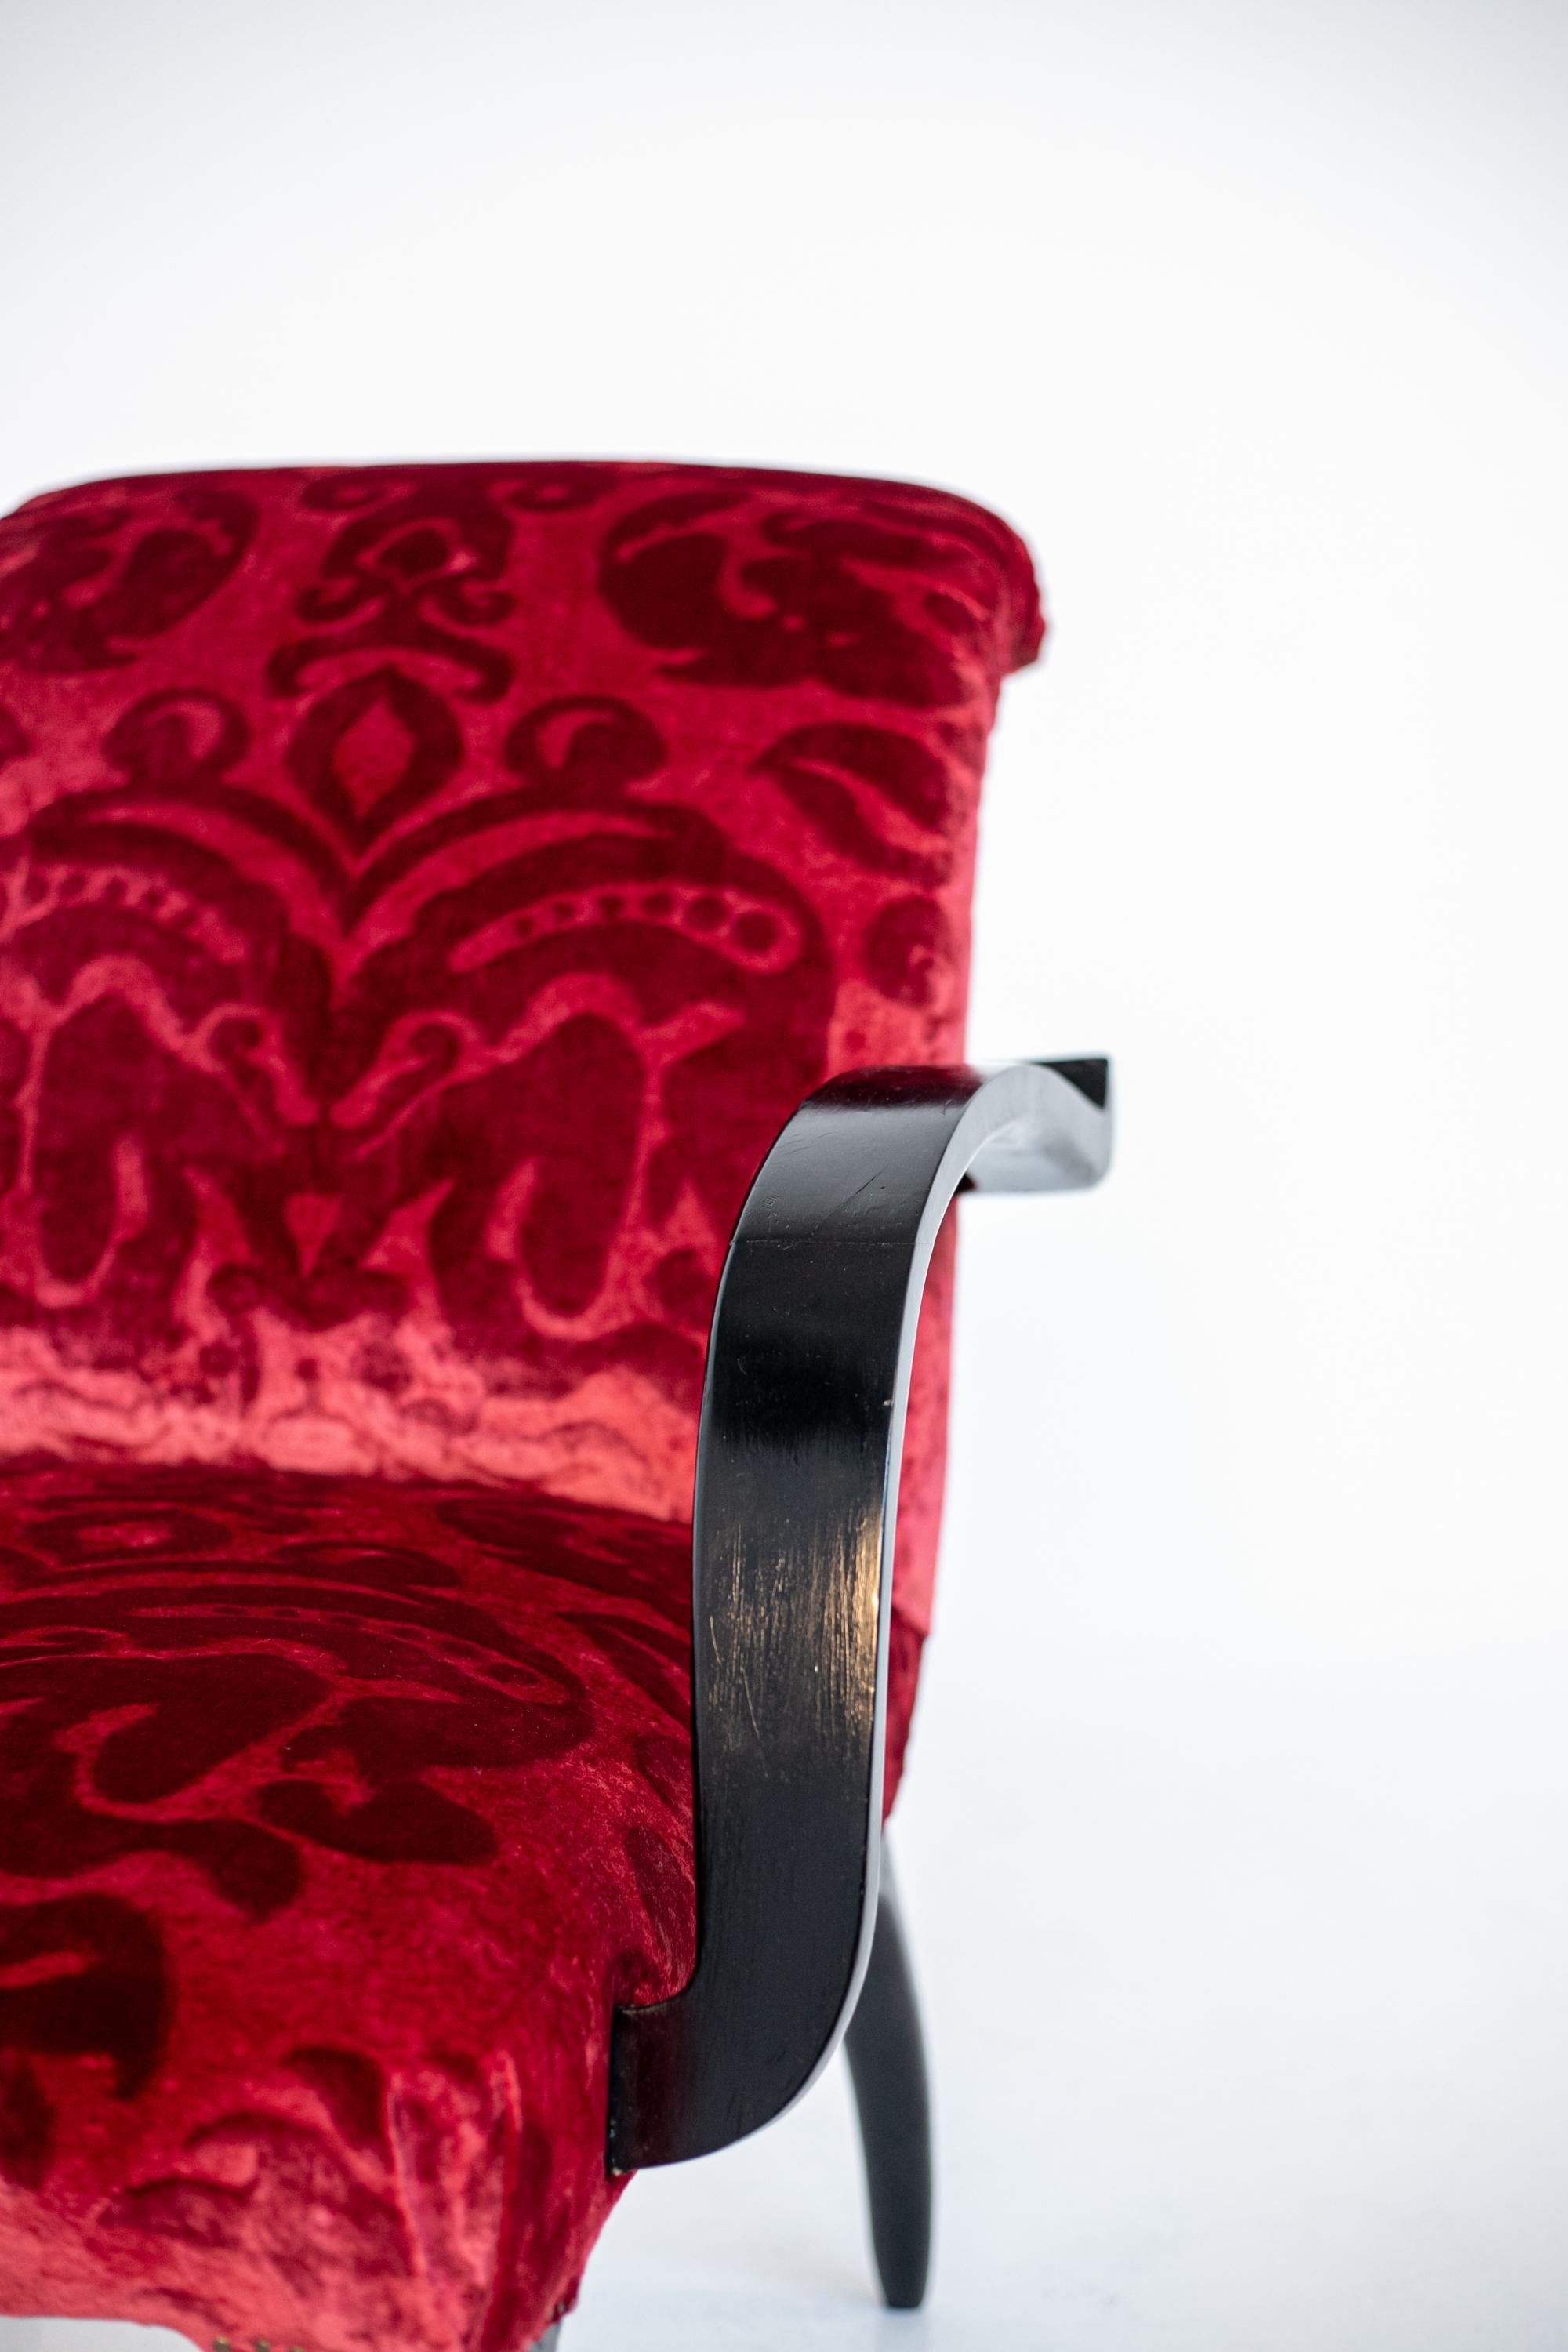 Mid-20th Century Gilbert Rohde Att. Pair of American Armchairs in Red Velvet Damask and Wood For Sale